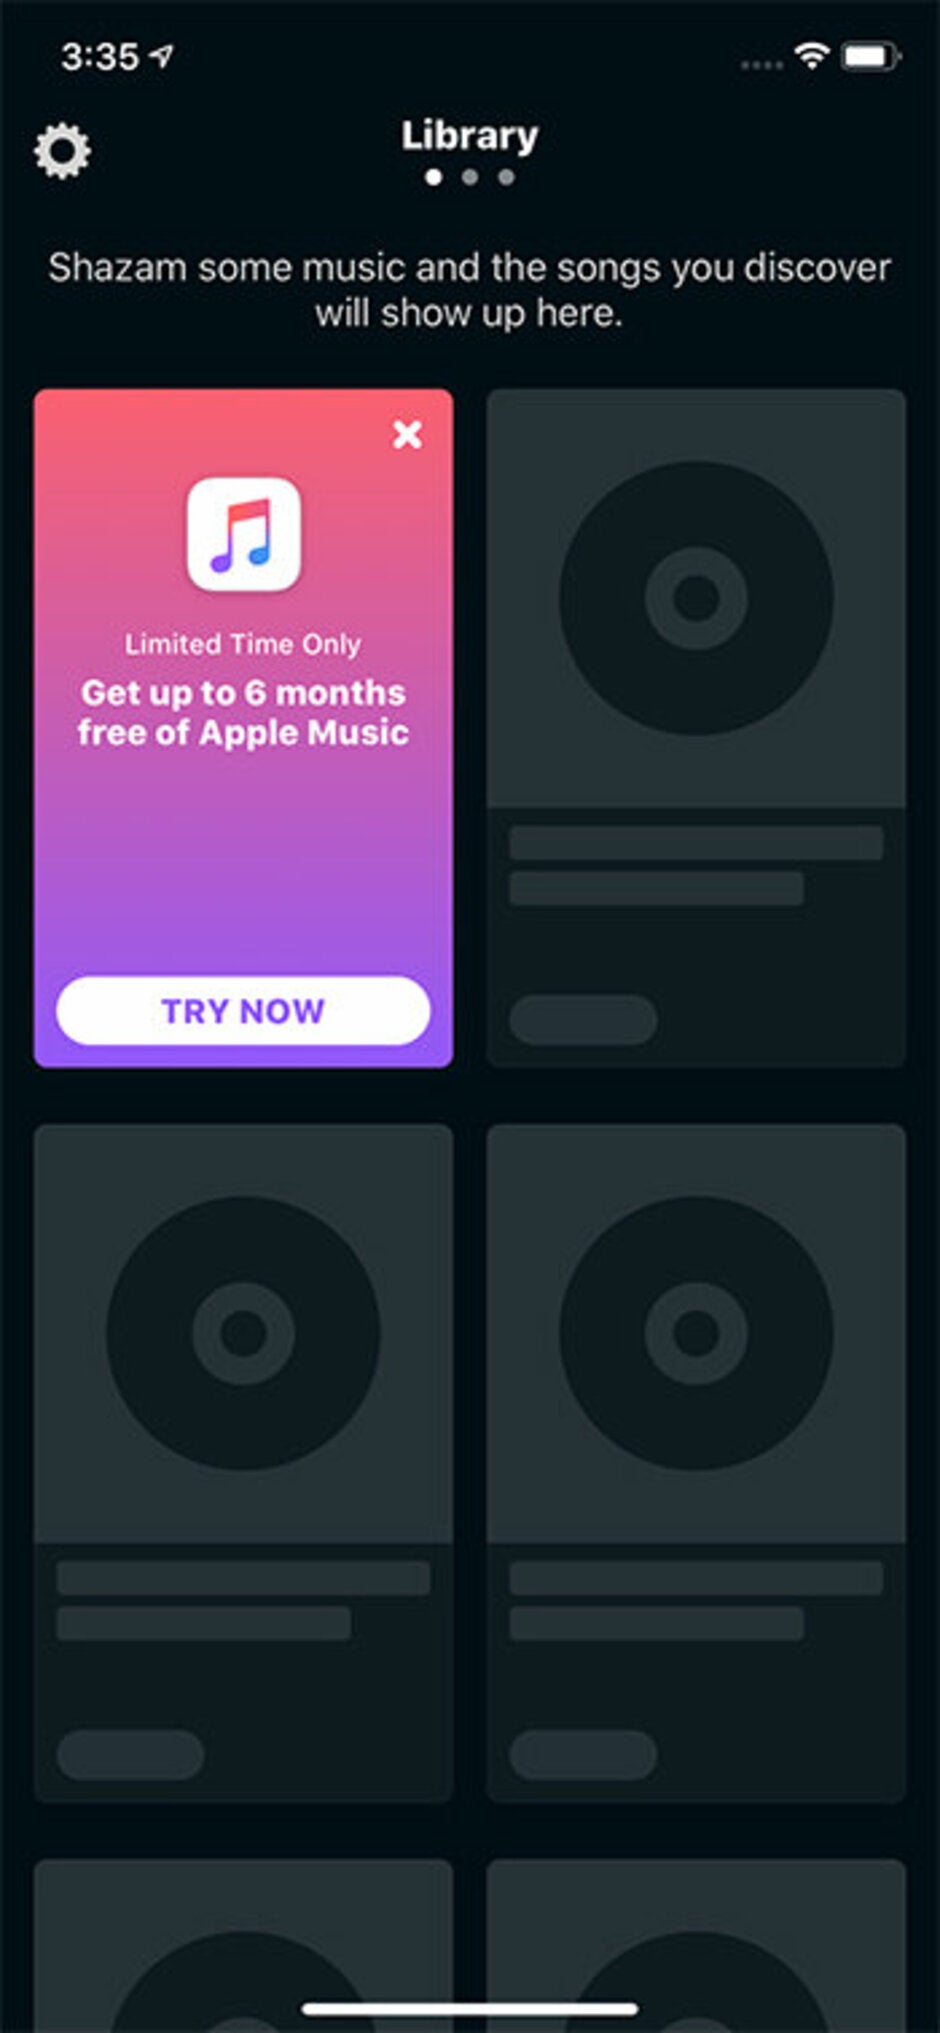 New Apple Music subscribers receiving six months of service for free